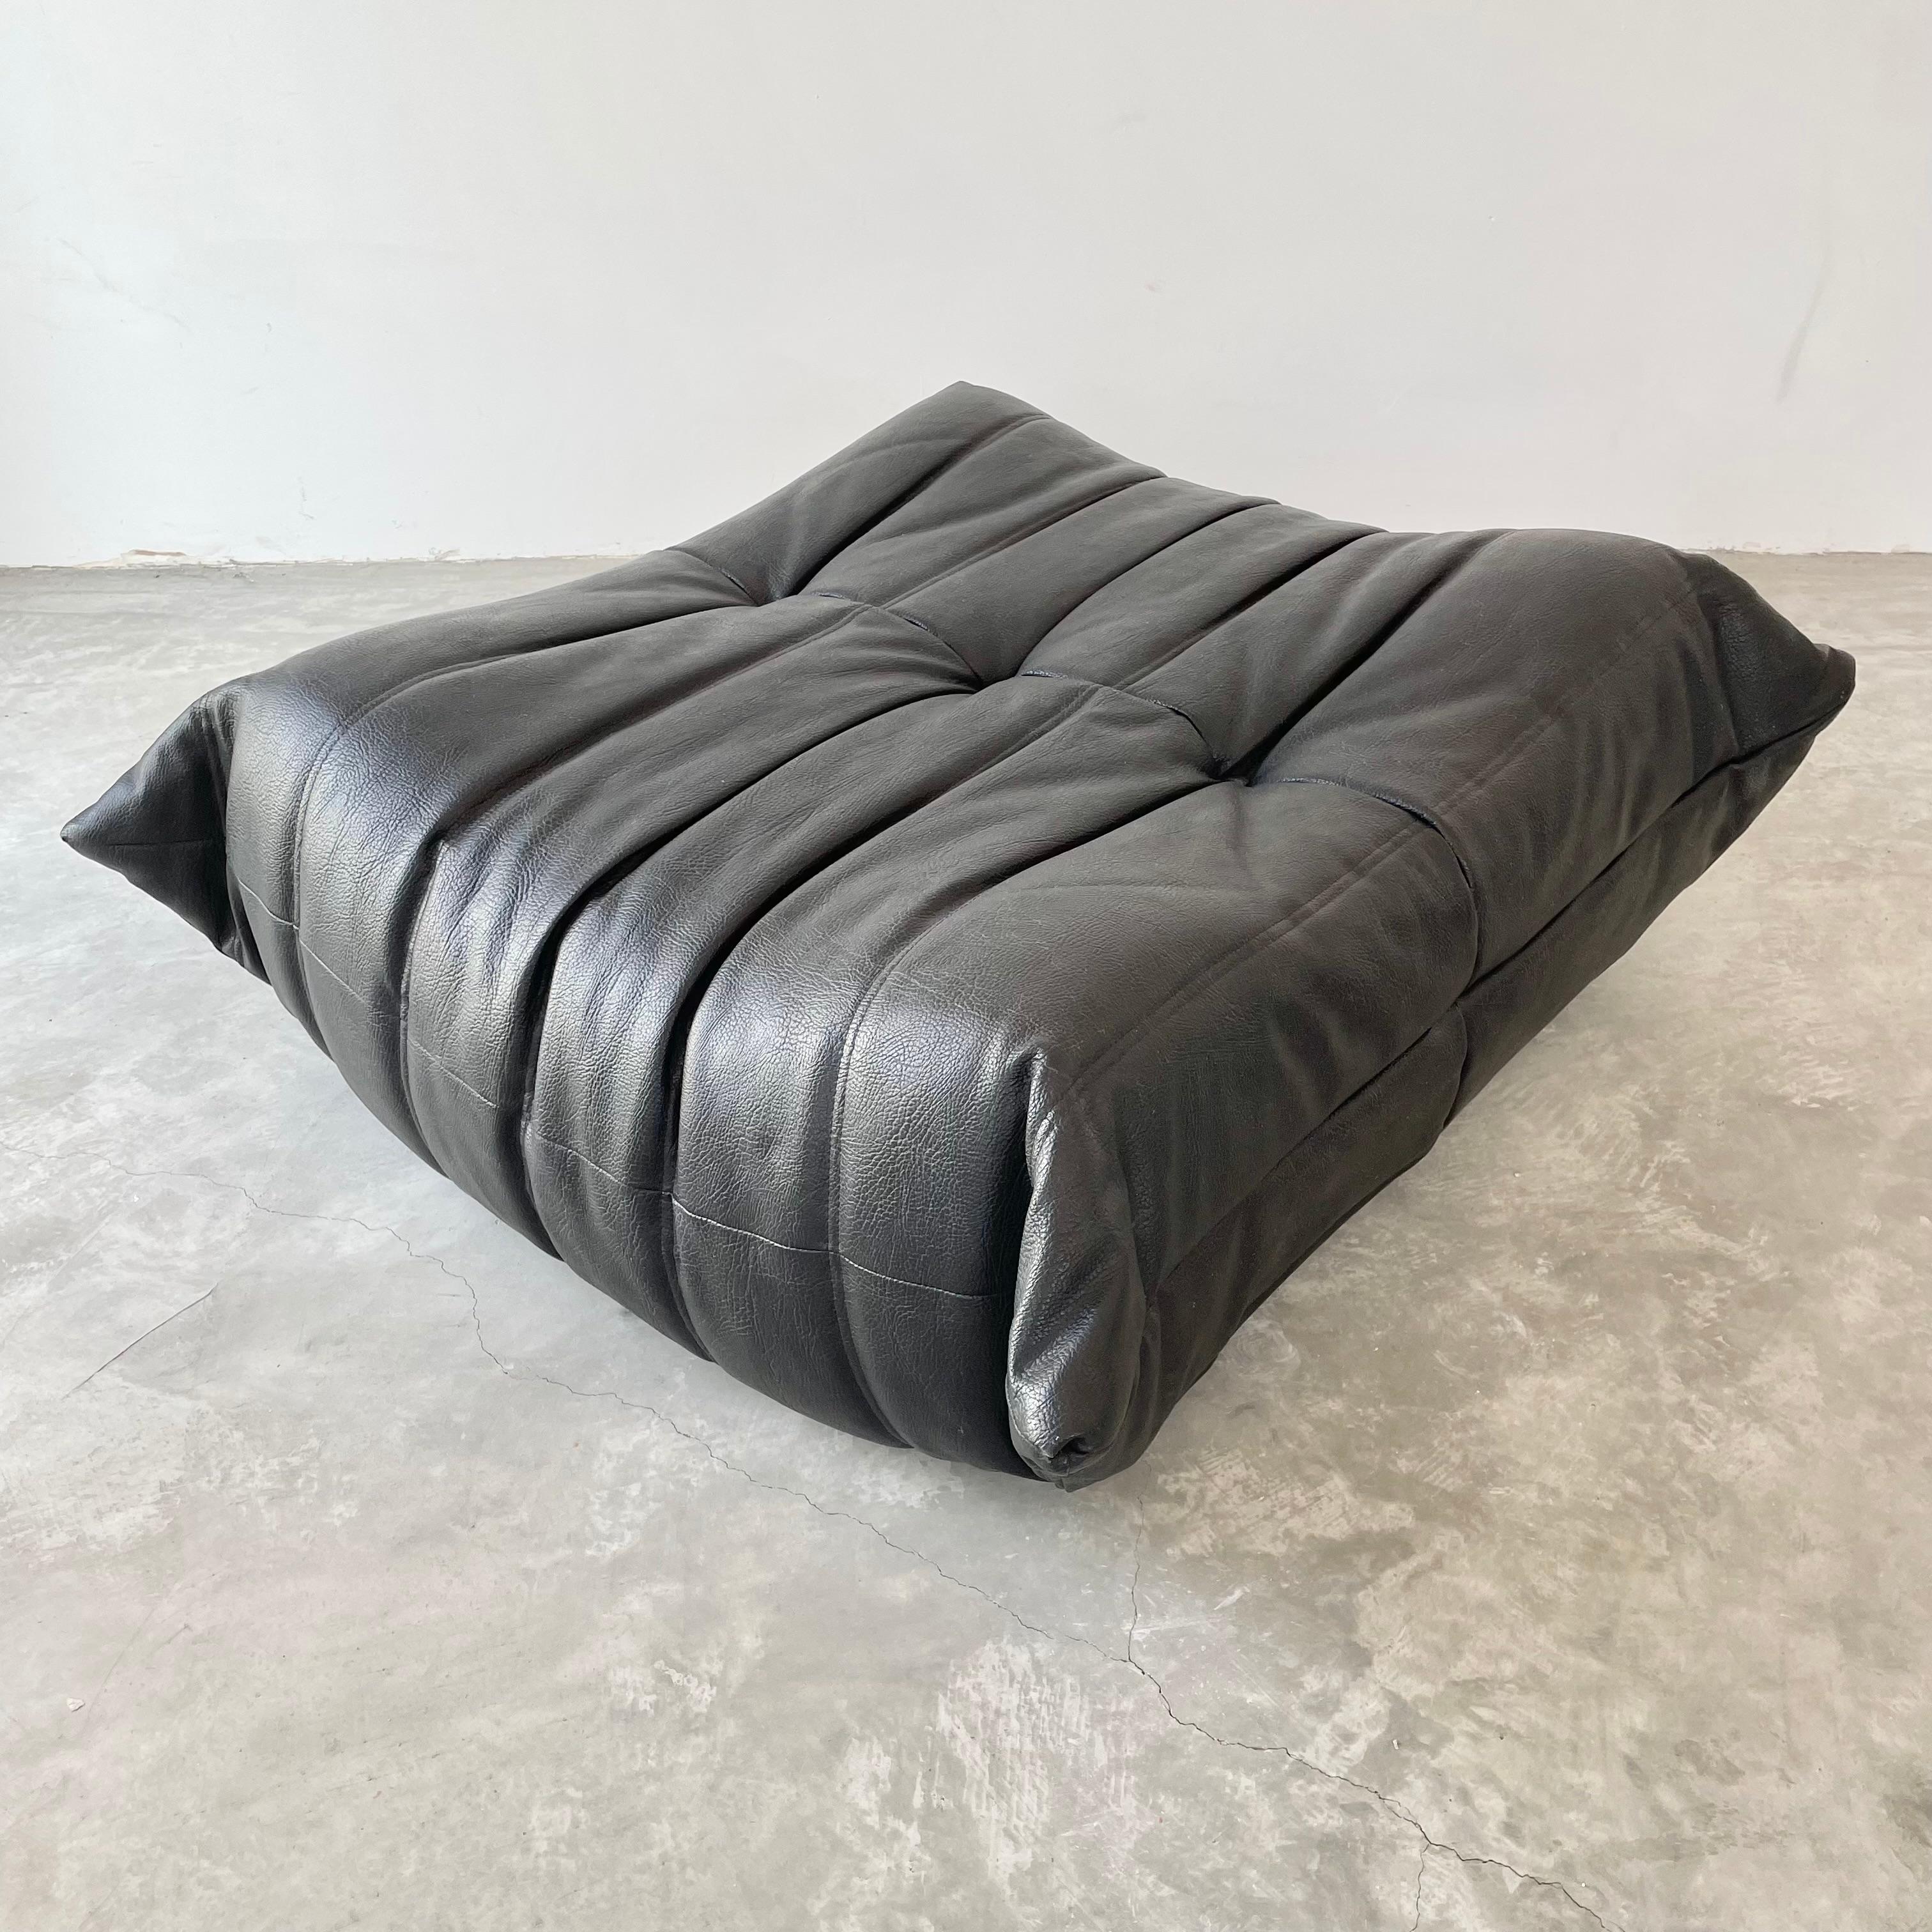 Classic French Togo ottoman by Michel Ducaroy for luxury brand Ligne Roset. Originally designed in the 1970s the iconic togo sofa is now a design classic. This ottoman comes in its original vintage pebbled black leather.

Timeless comfort and